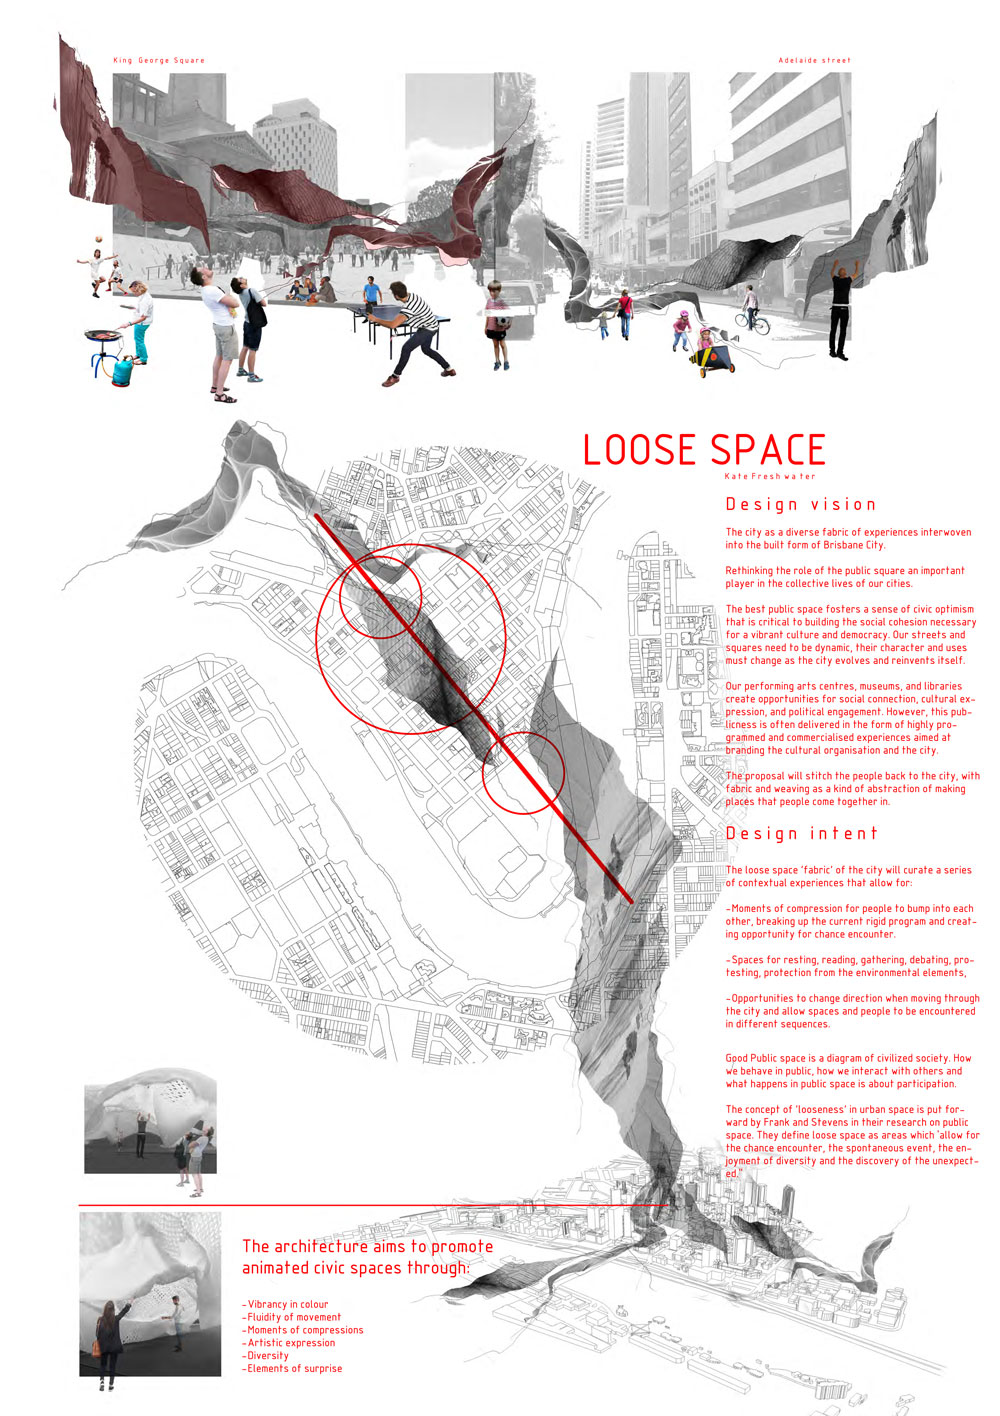 Kate Freshwater's Loose Space design idea for King George Square